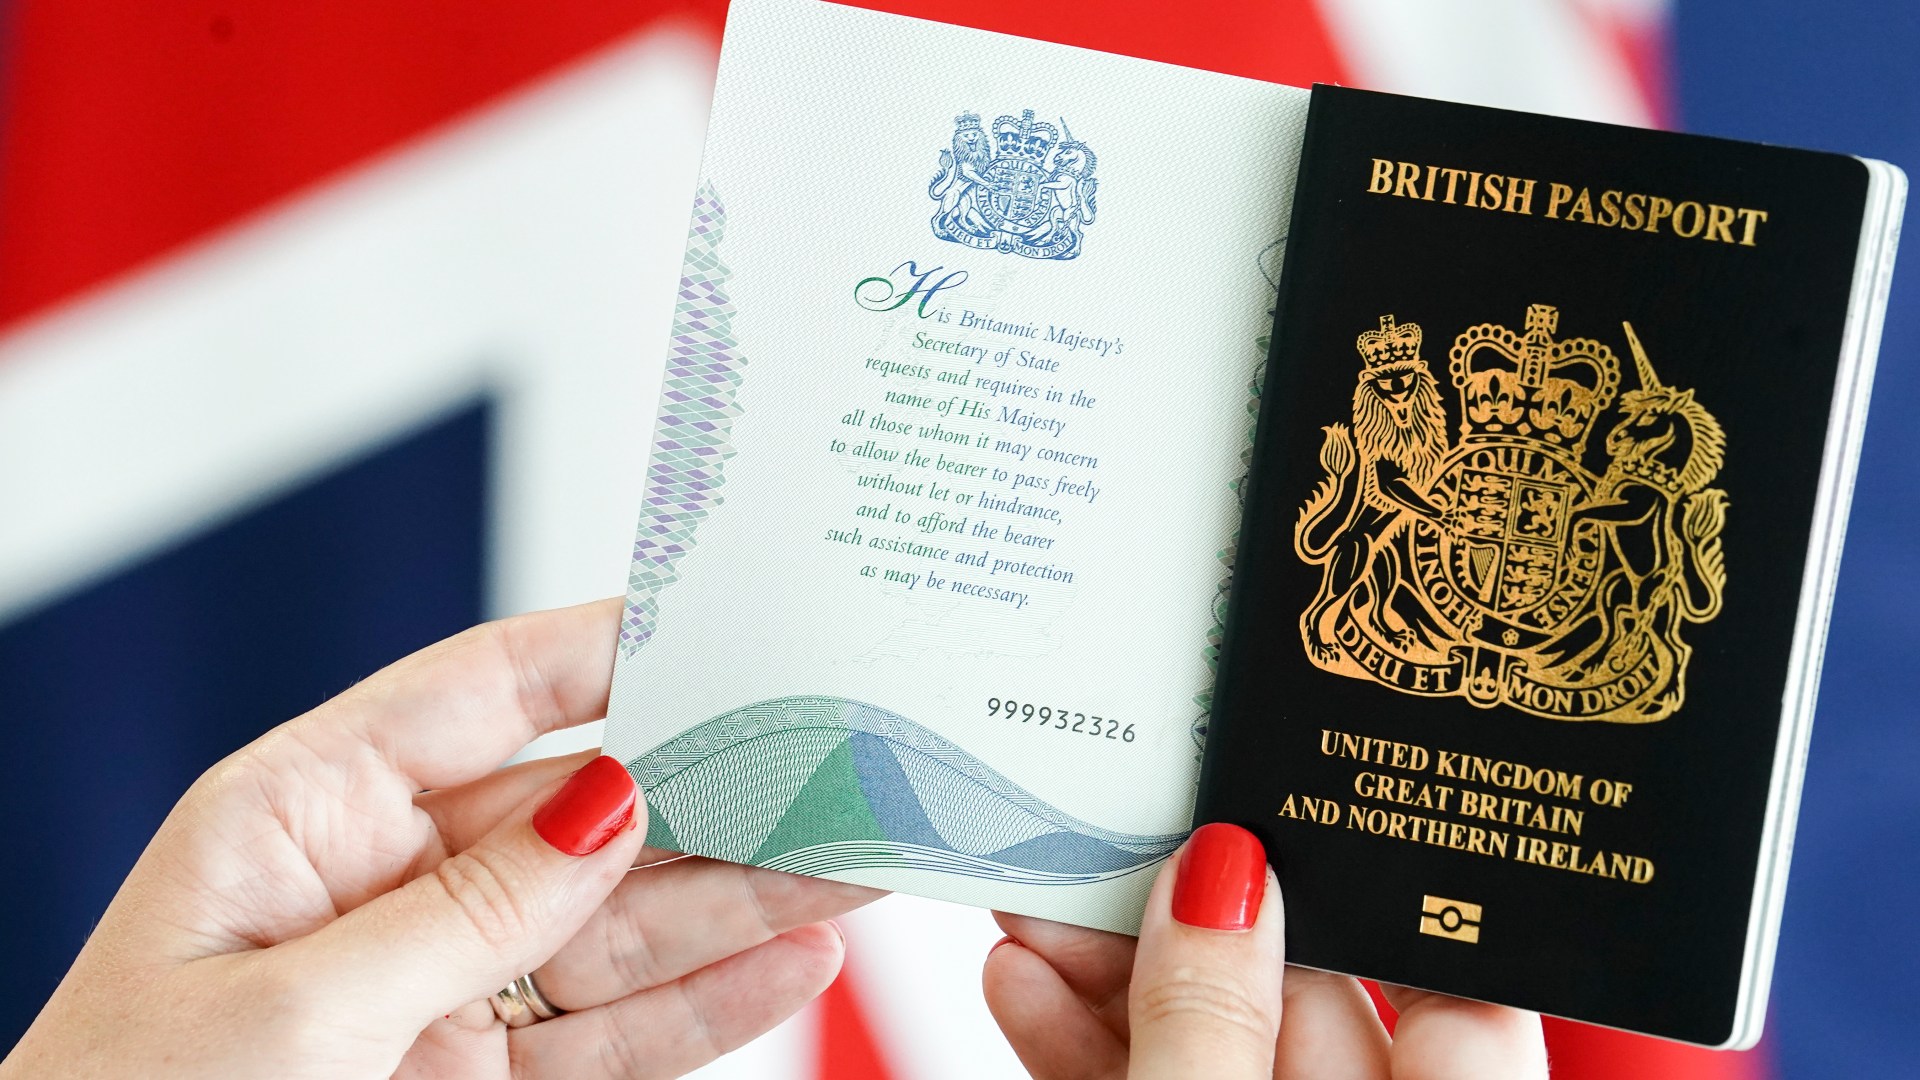 32million Brits at Risk: Lisa Minot Urges Check of Passports Before Easter Holidays